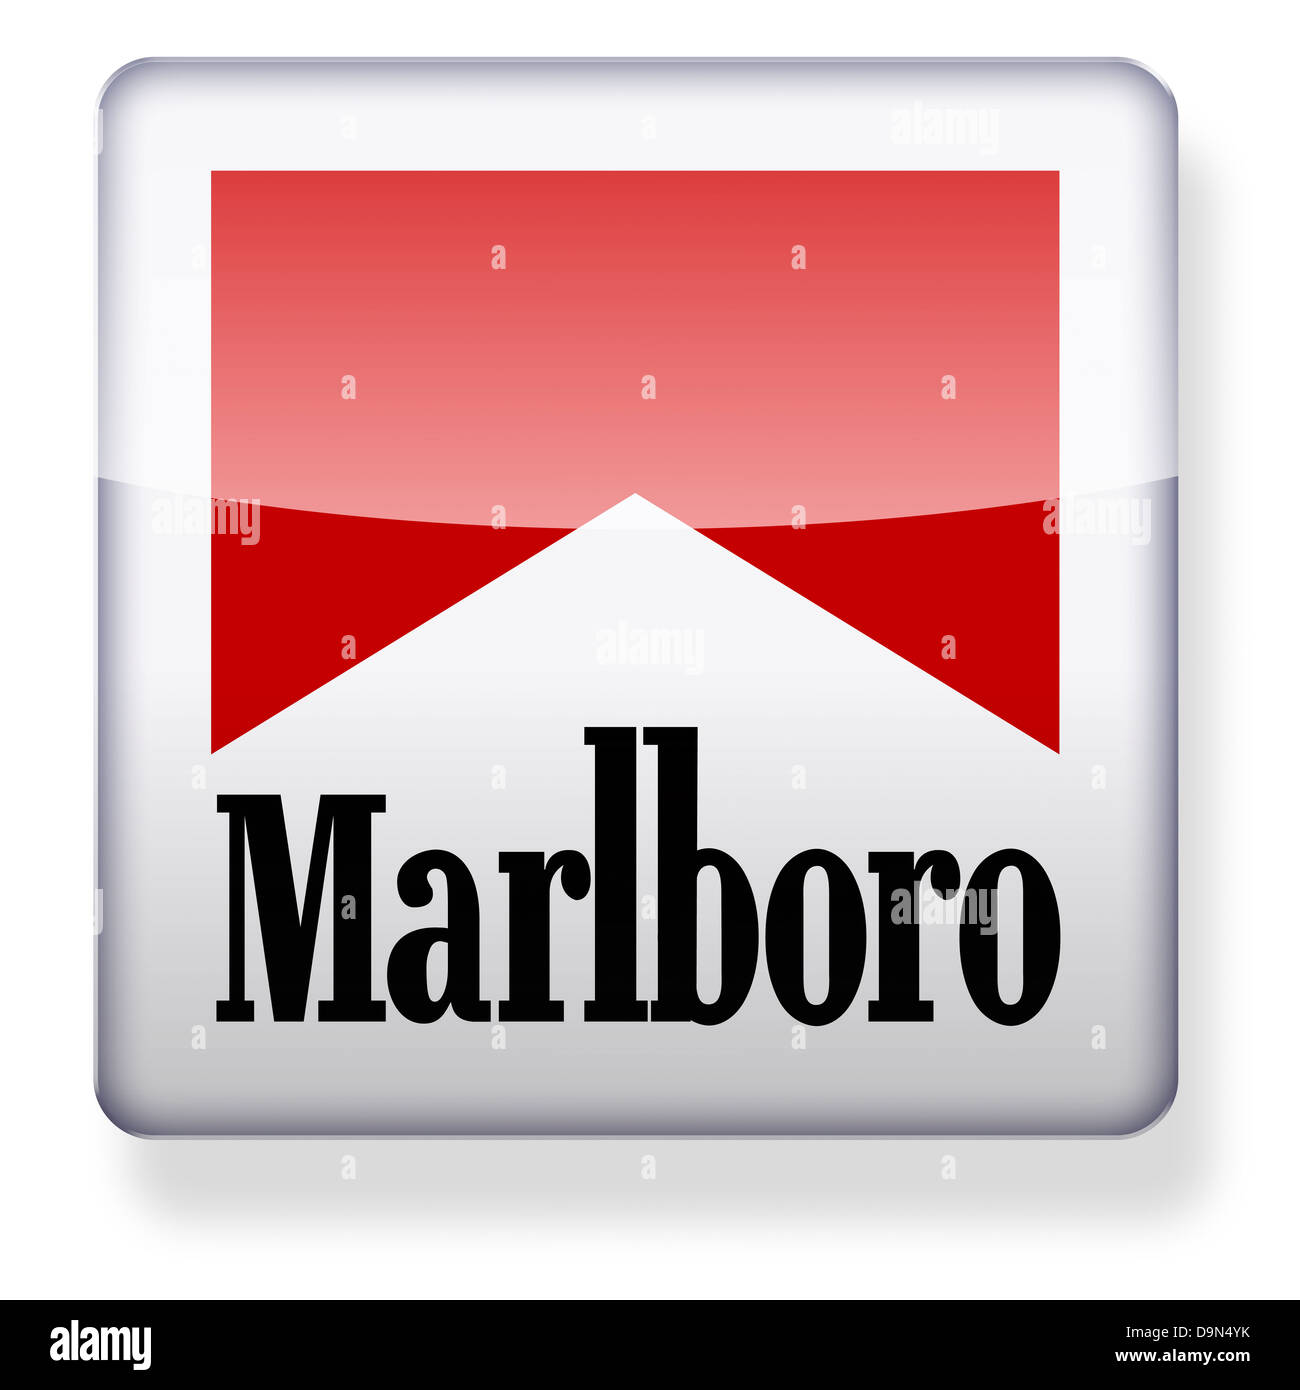 Marlboro cigarettes logo as an app icon. Clipping path included. Stock Photo